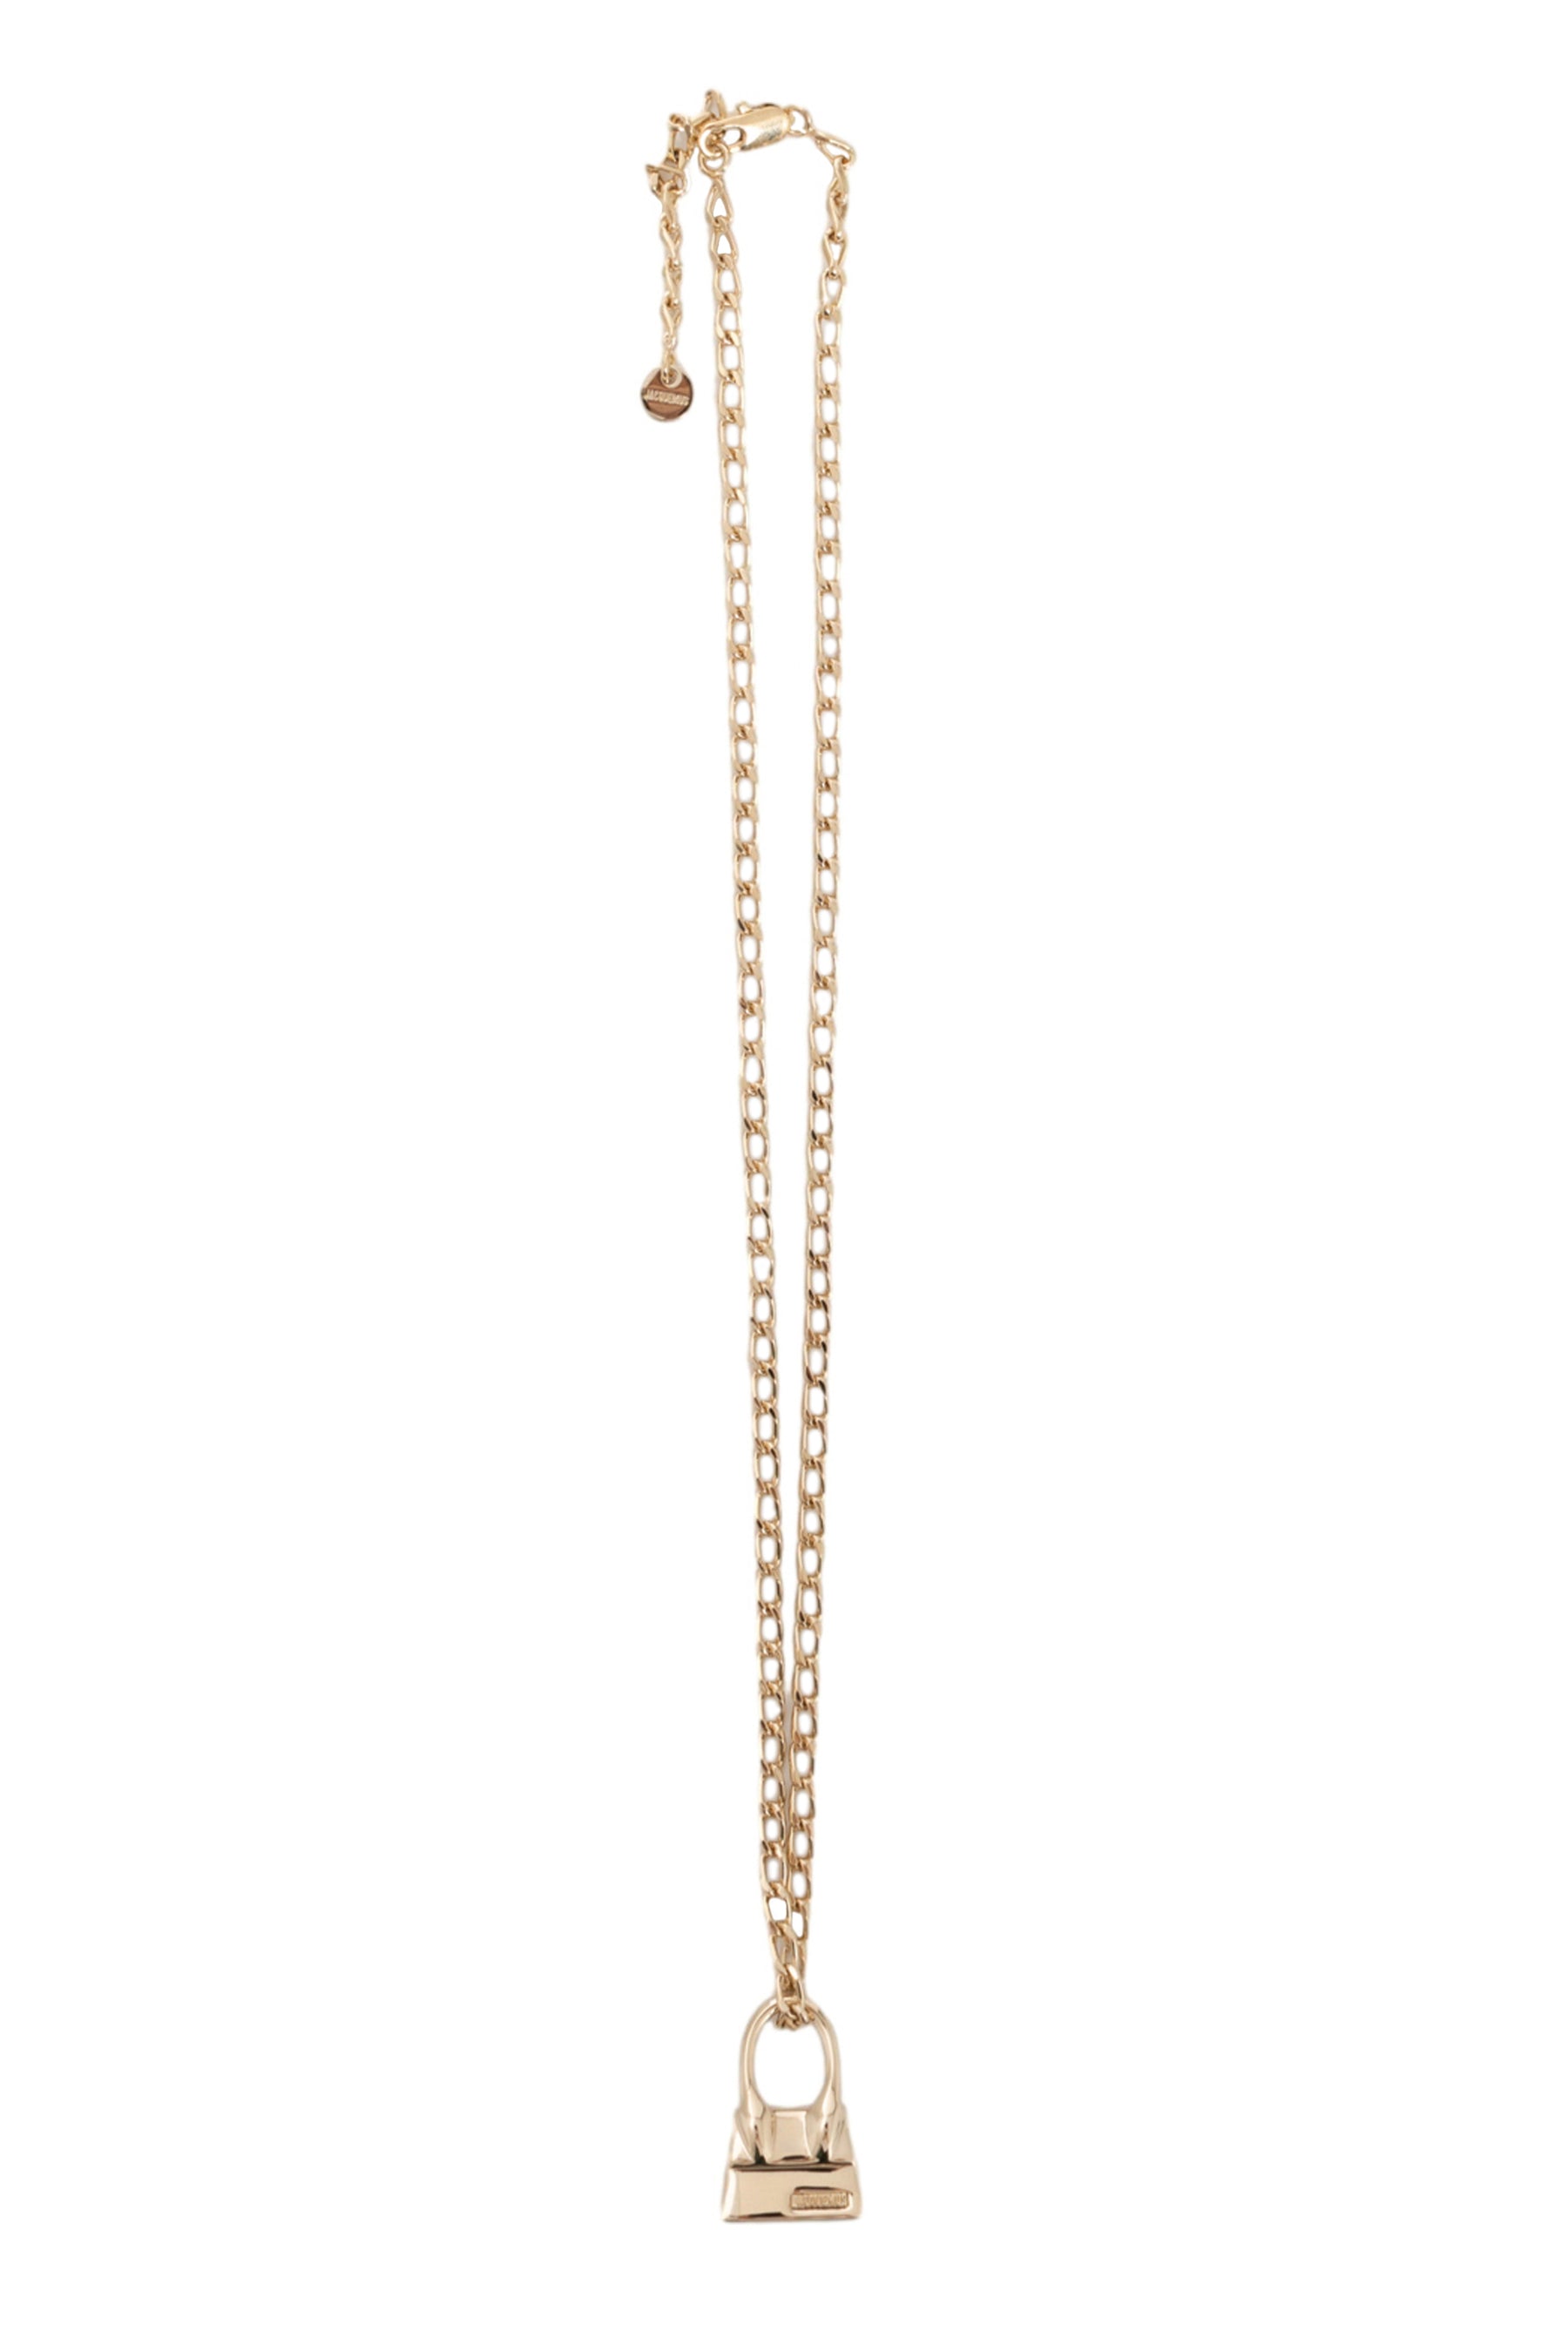 LE COLLIER CHIQUITO / LIGHT GOLD